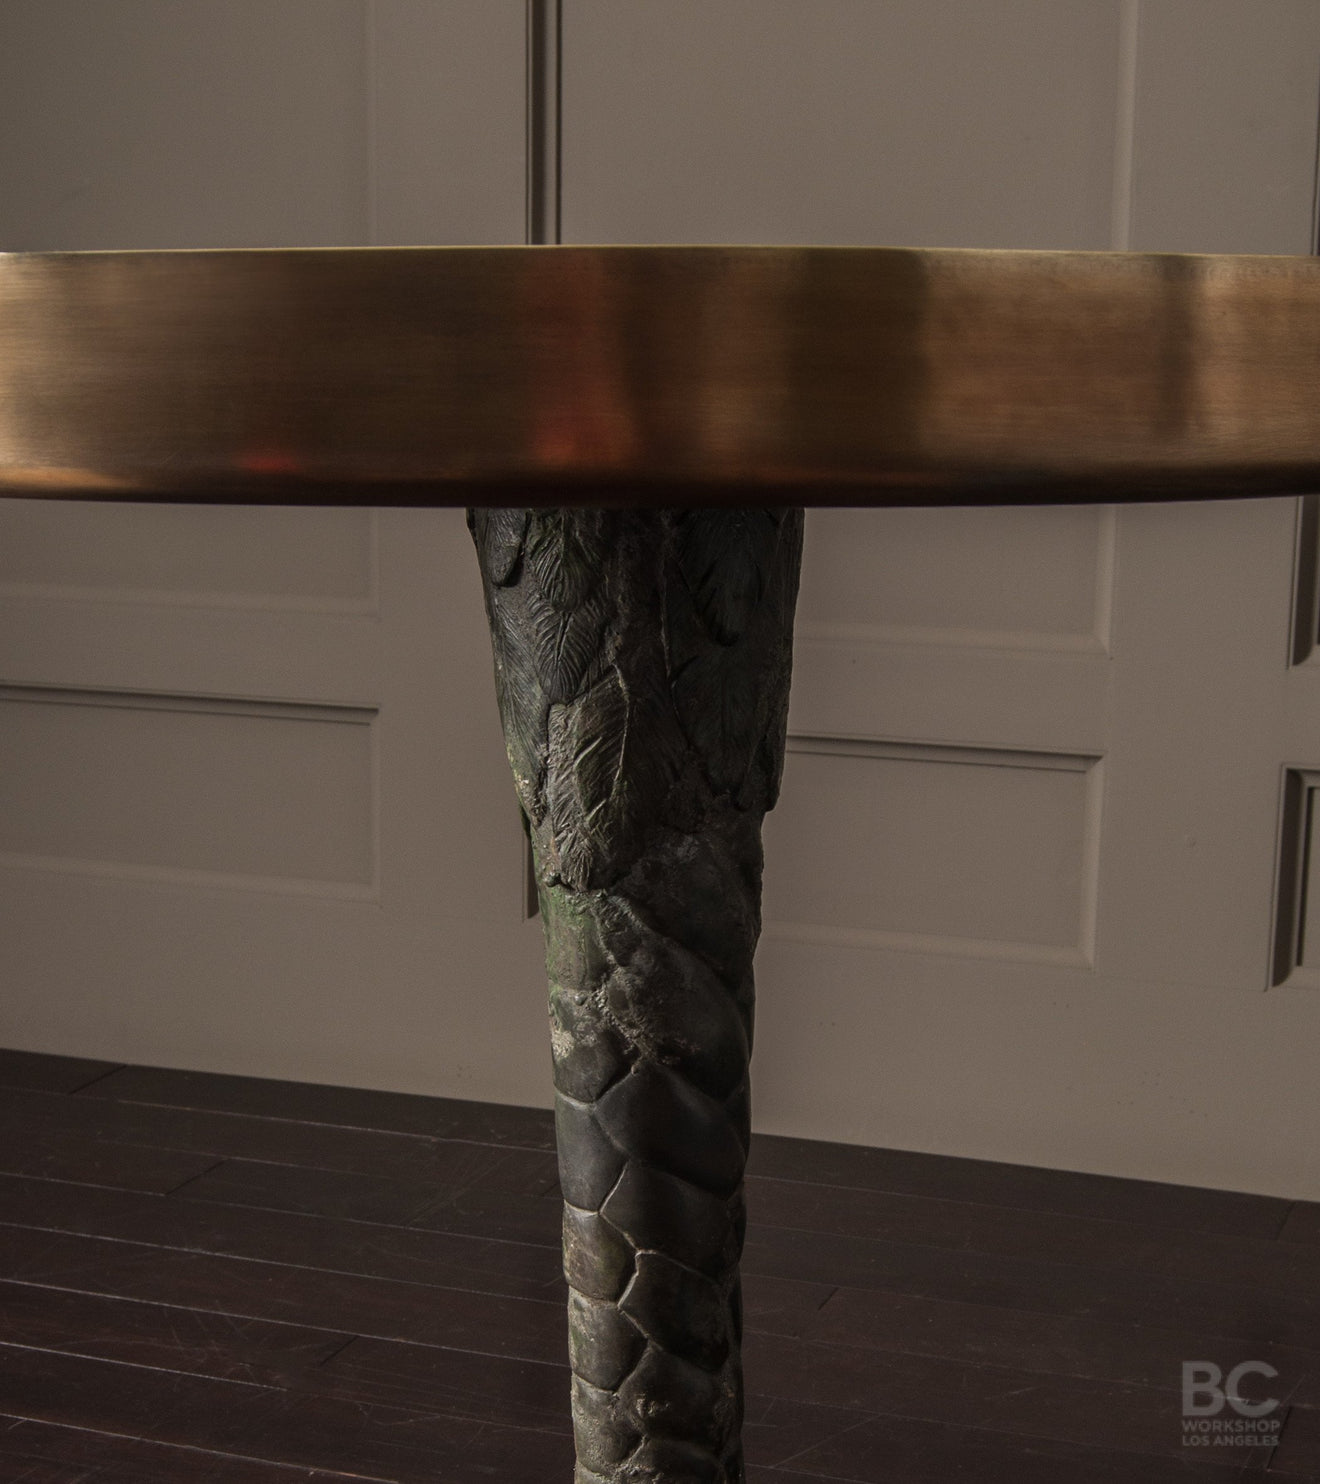 Talon Table with Brass Top